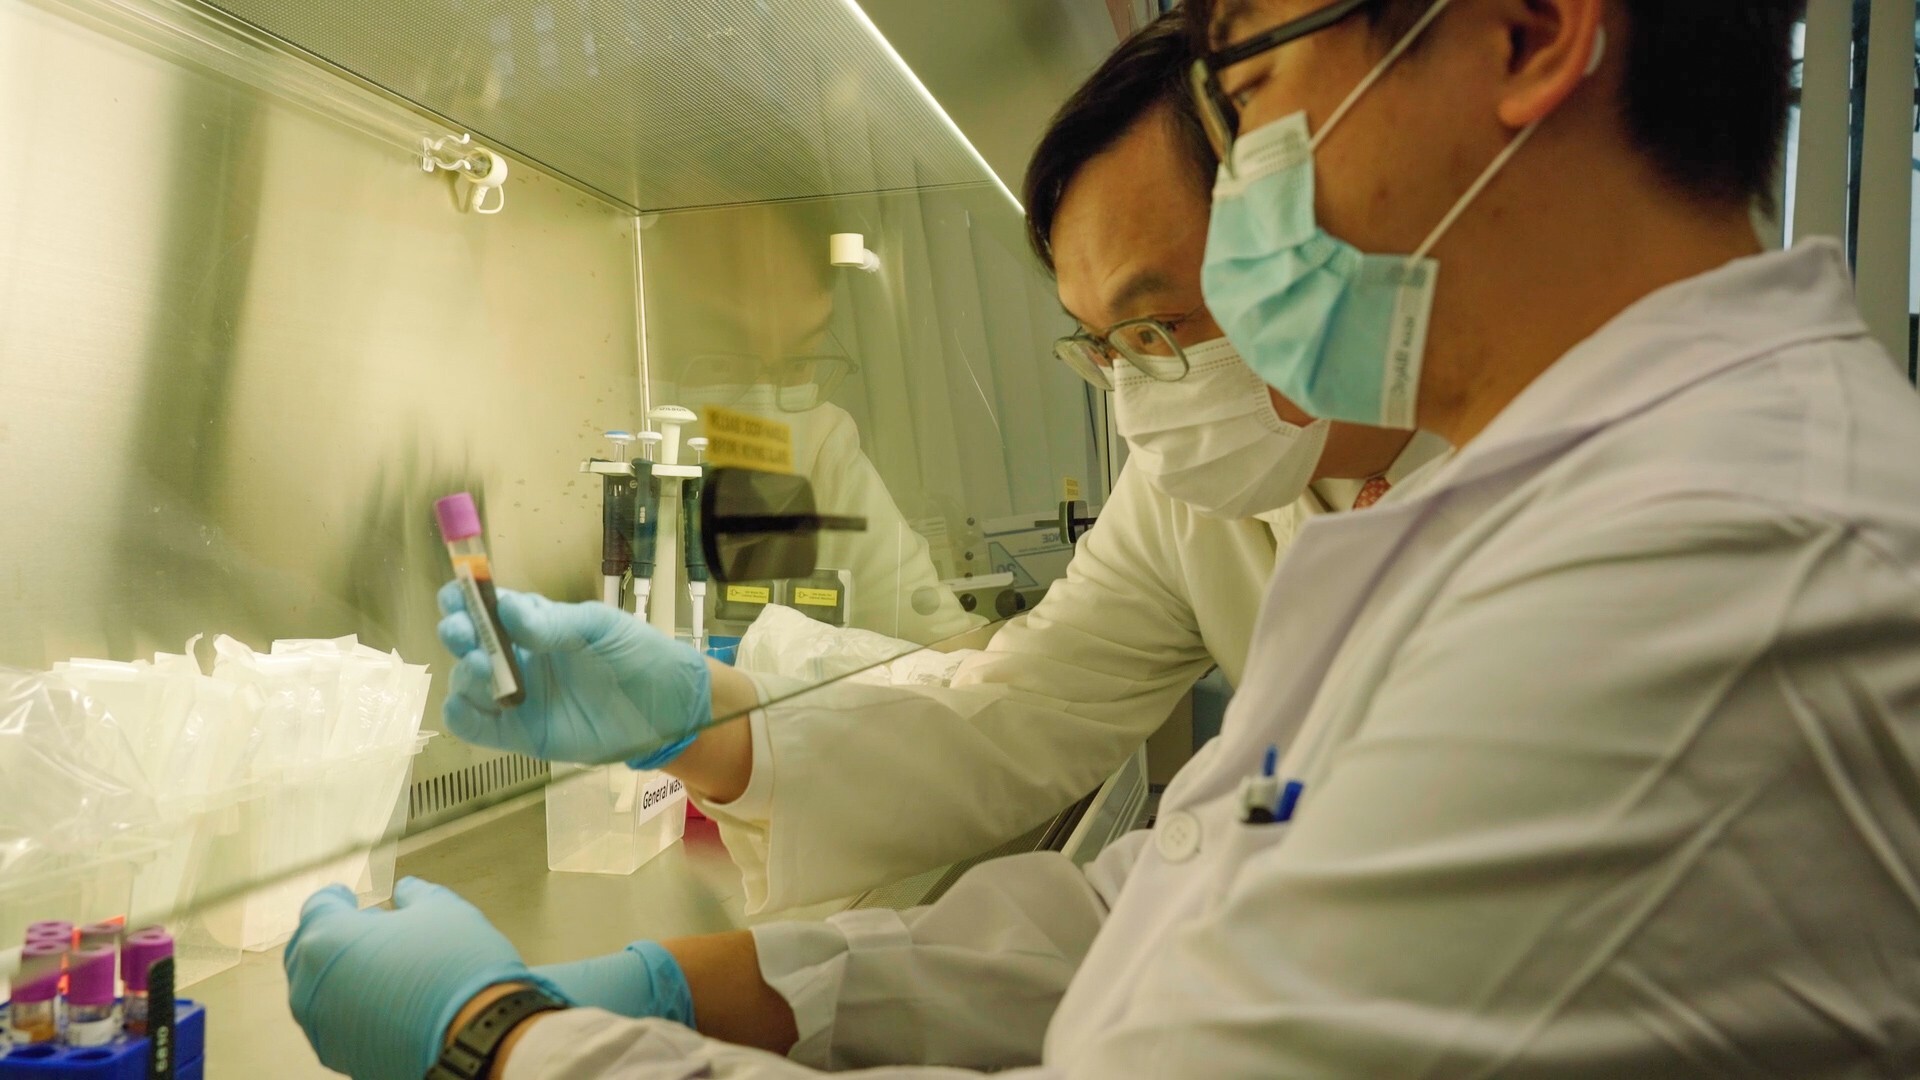 Dennis Lo (left), professor of medicine and chemical pathology at Chinese University of Hong Kong, has developed a blood test that can detect 50 types of cancer from just one sample, which gives patients the chance to undergo medical treatment when survival rates are high.